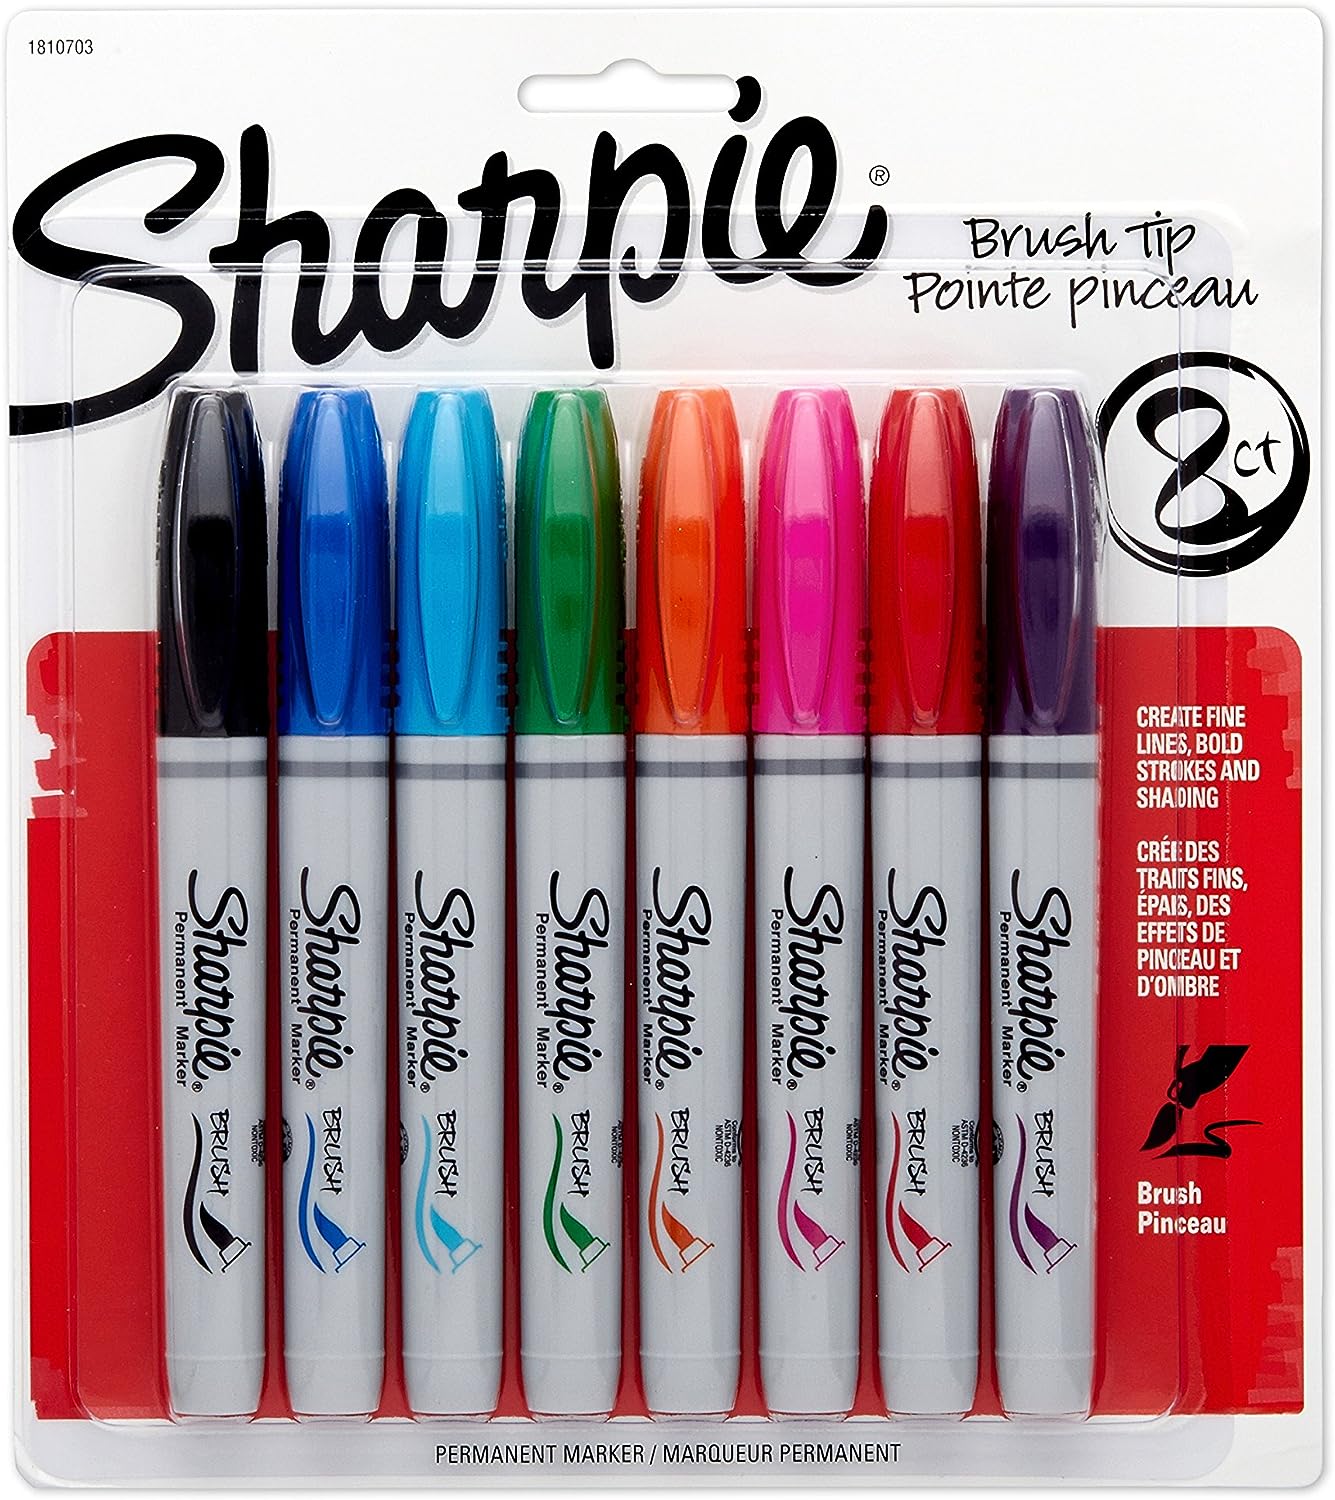 SHARPIE Brush Tip Permanent Markers, 8 Colored Markers (1810703)